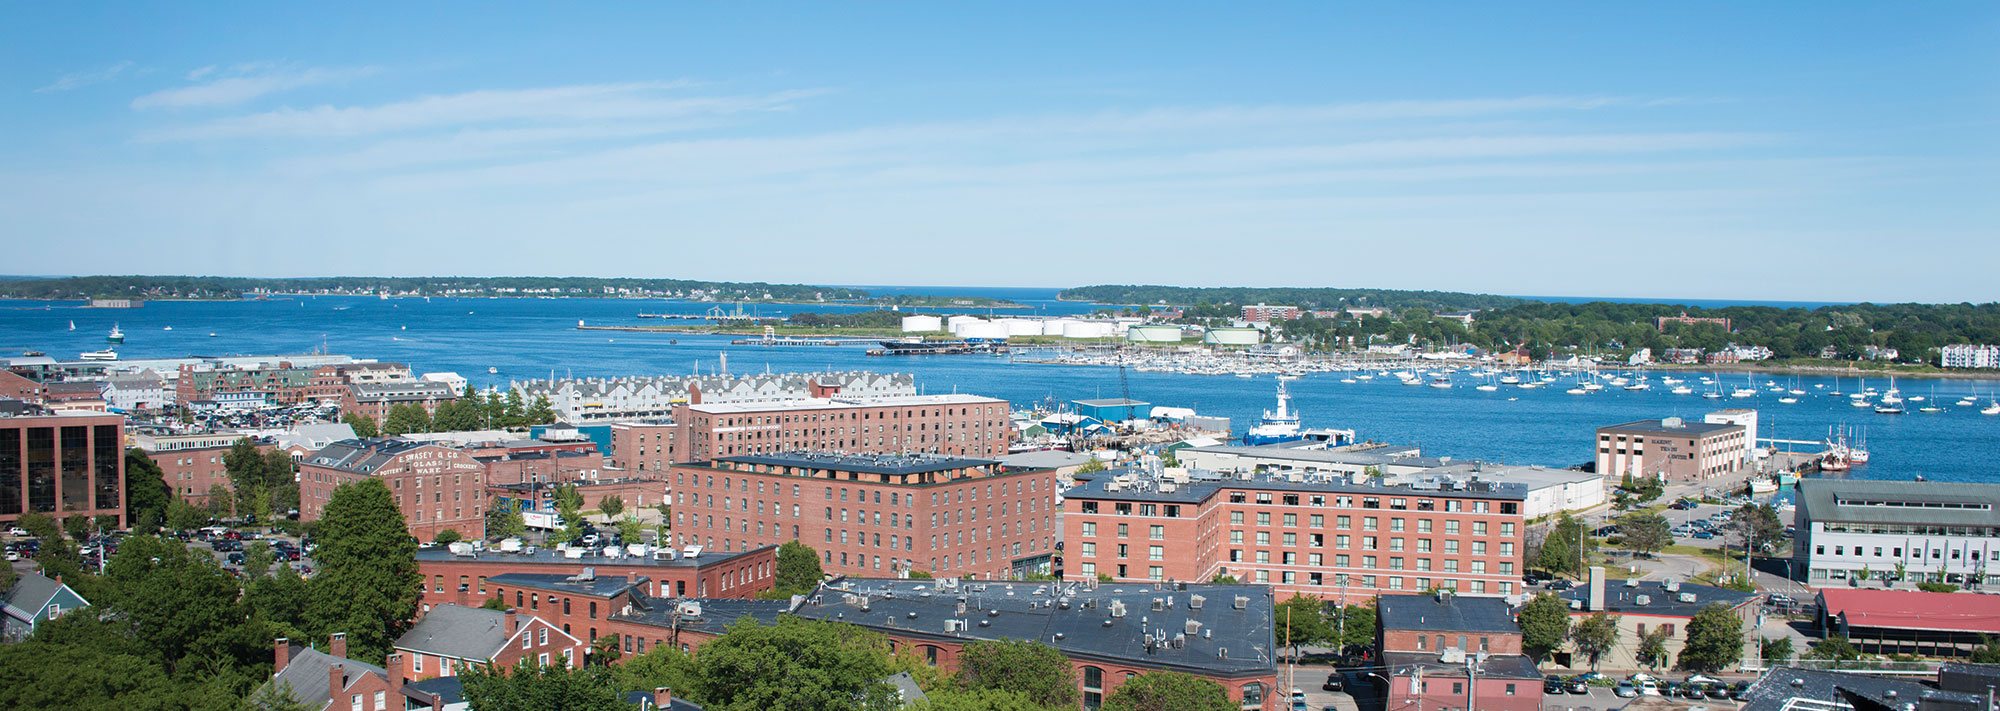 panoramic view of the bay. ships and buildings